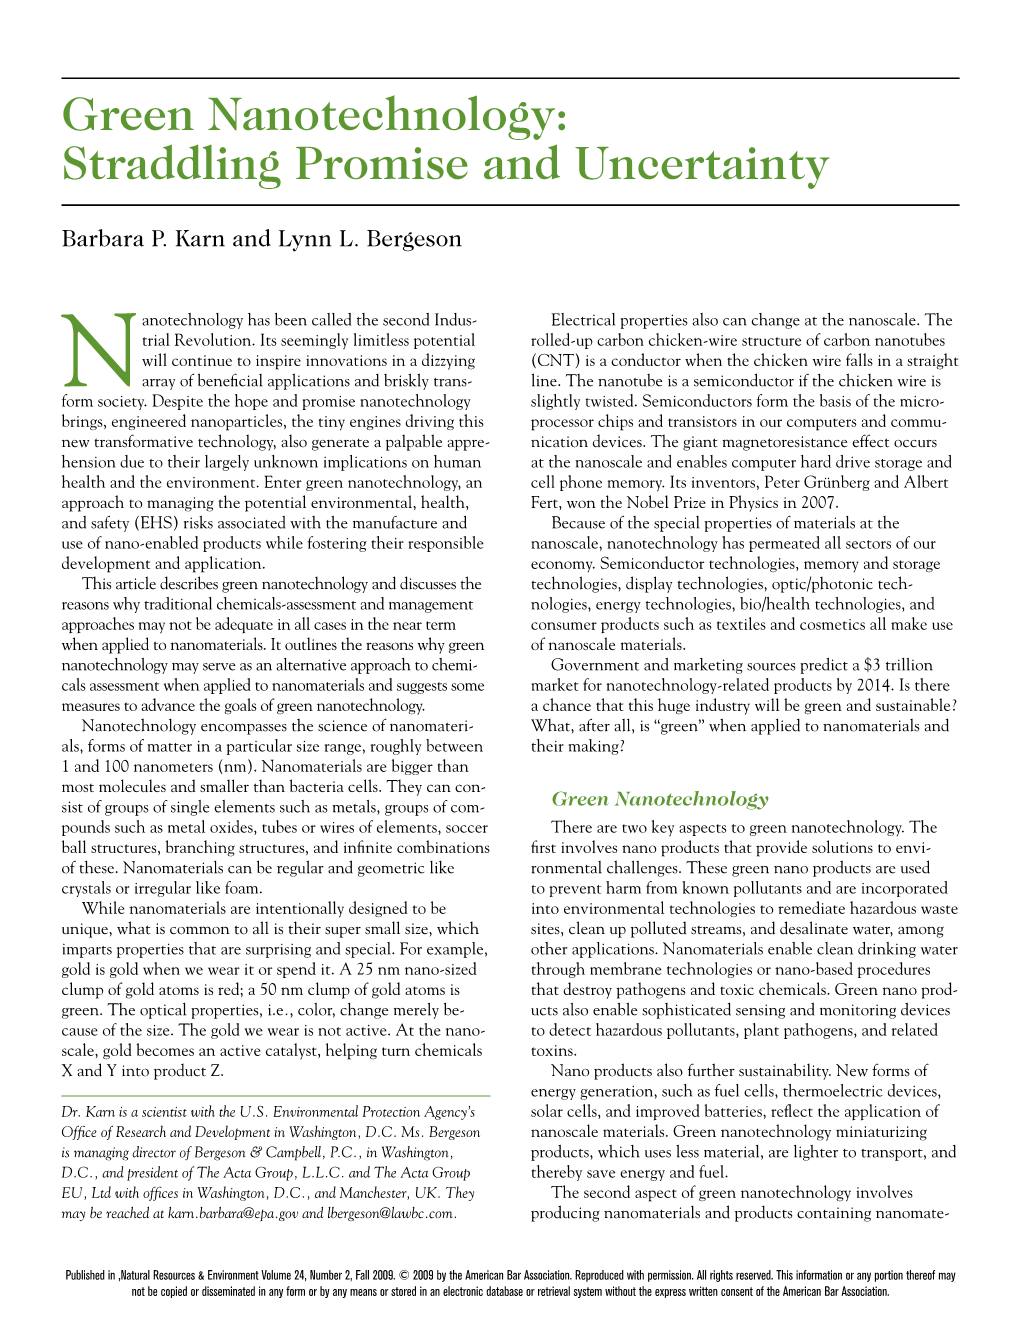 Green Nanotechnology: Straddling Promise and Uncertainty